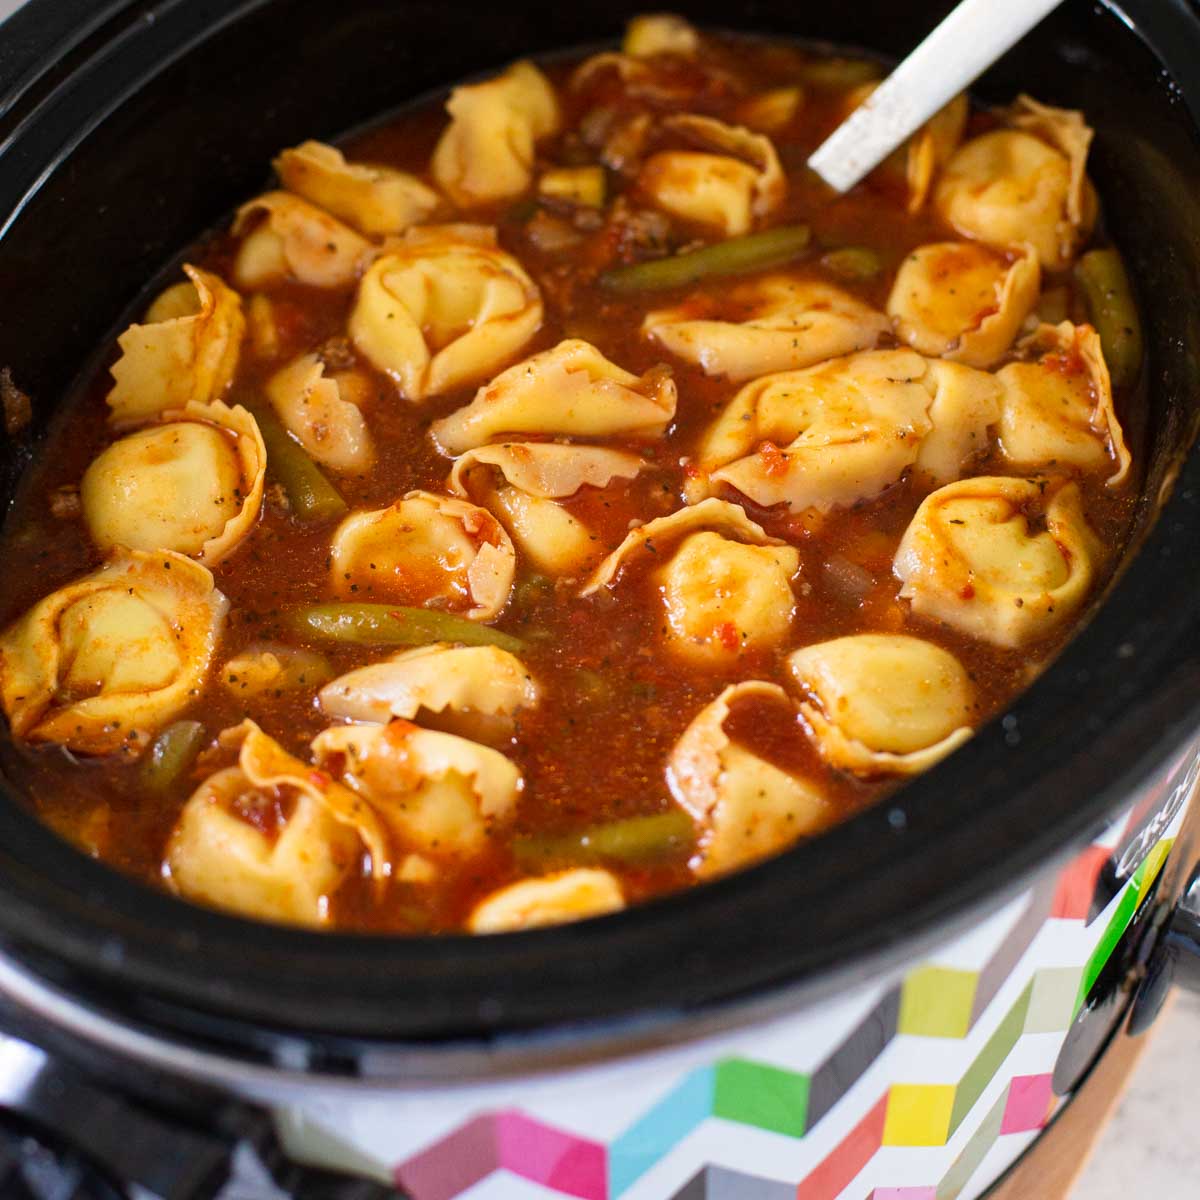 A crockpot has tortellini soup with a tomato broth base.